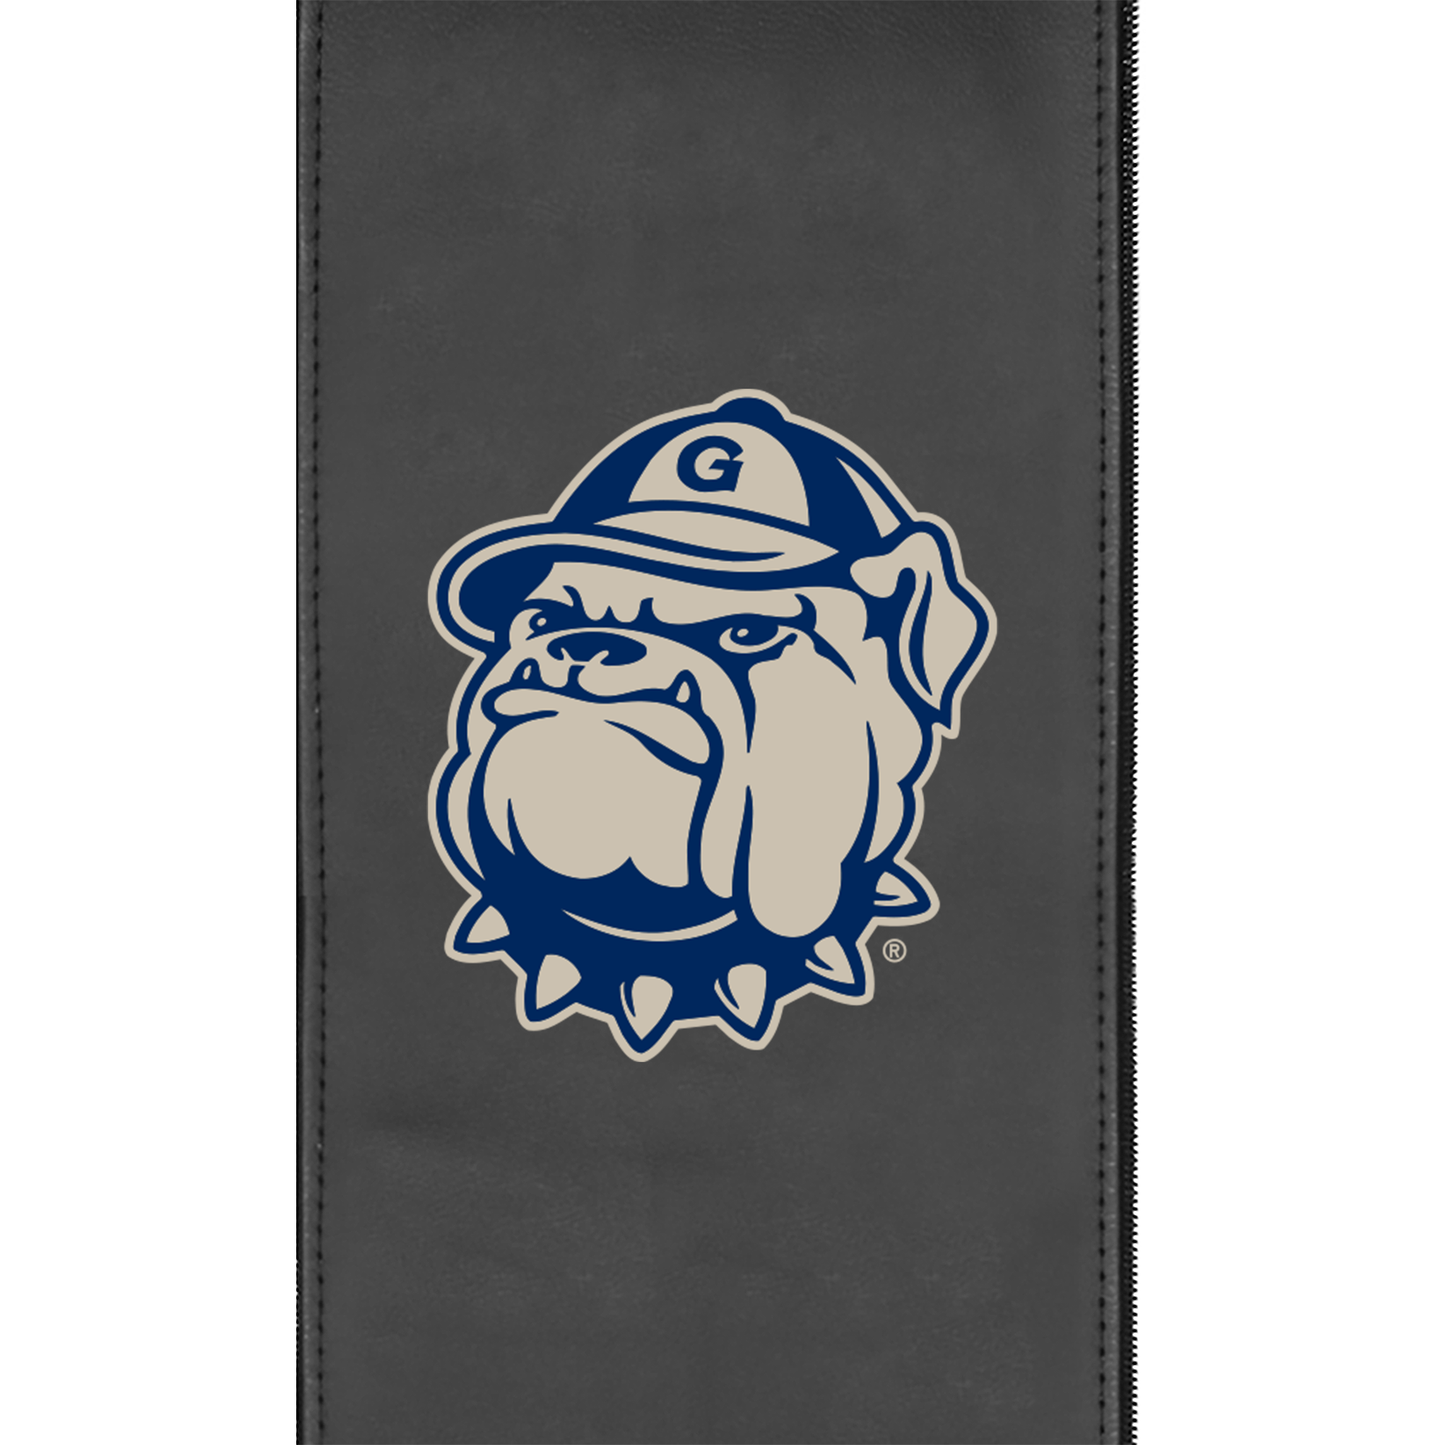 Game Rocker 100 with Georgetown Hoyas Secondary